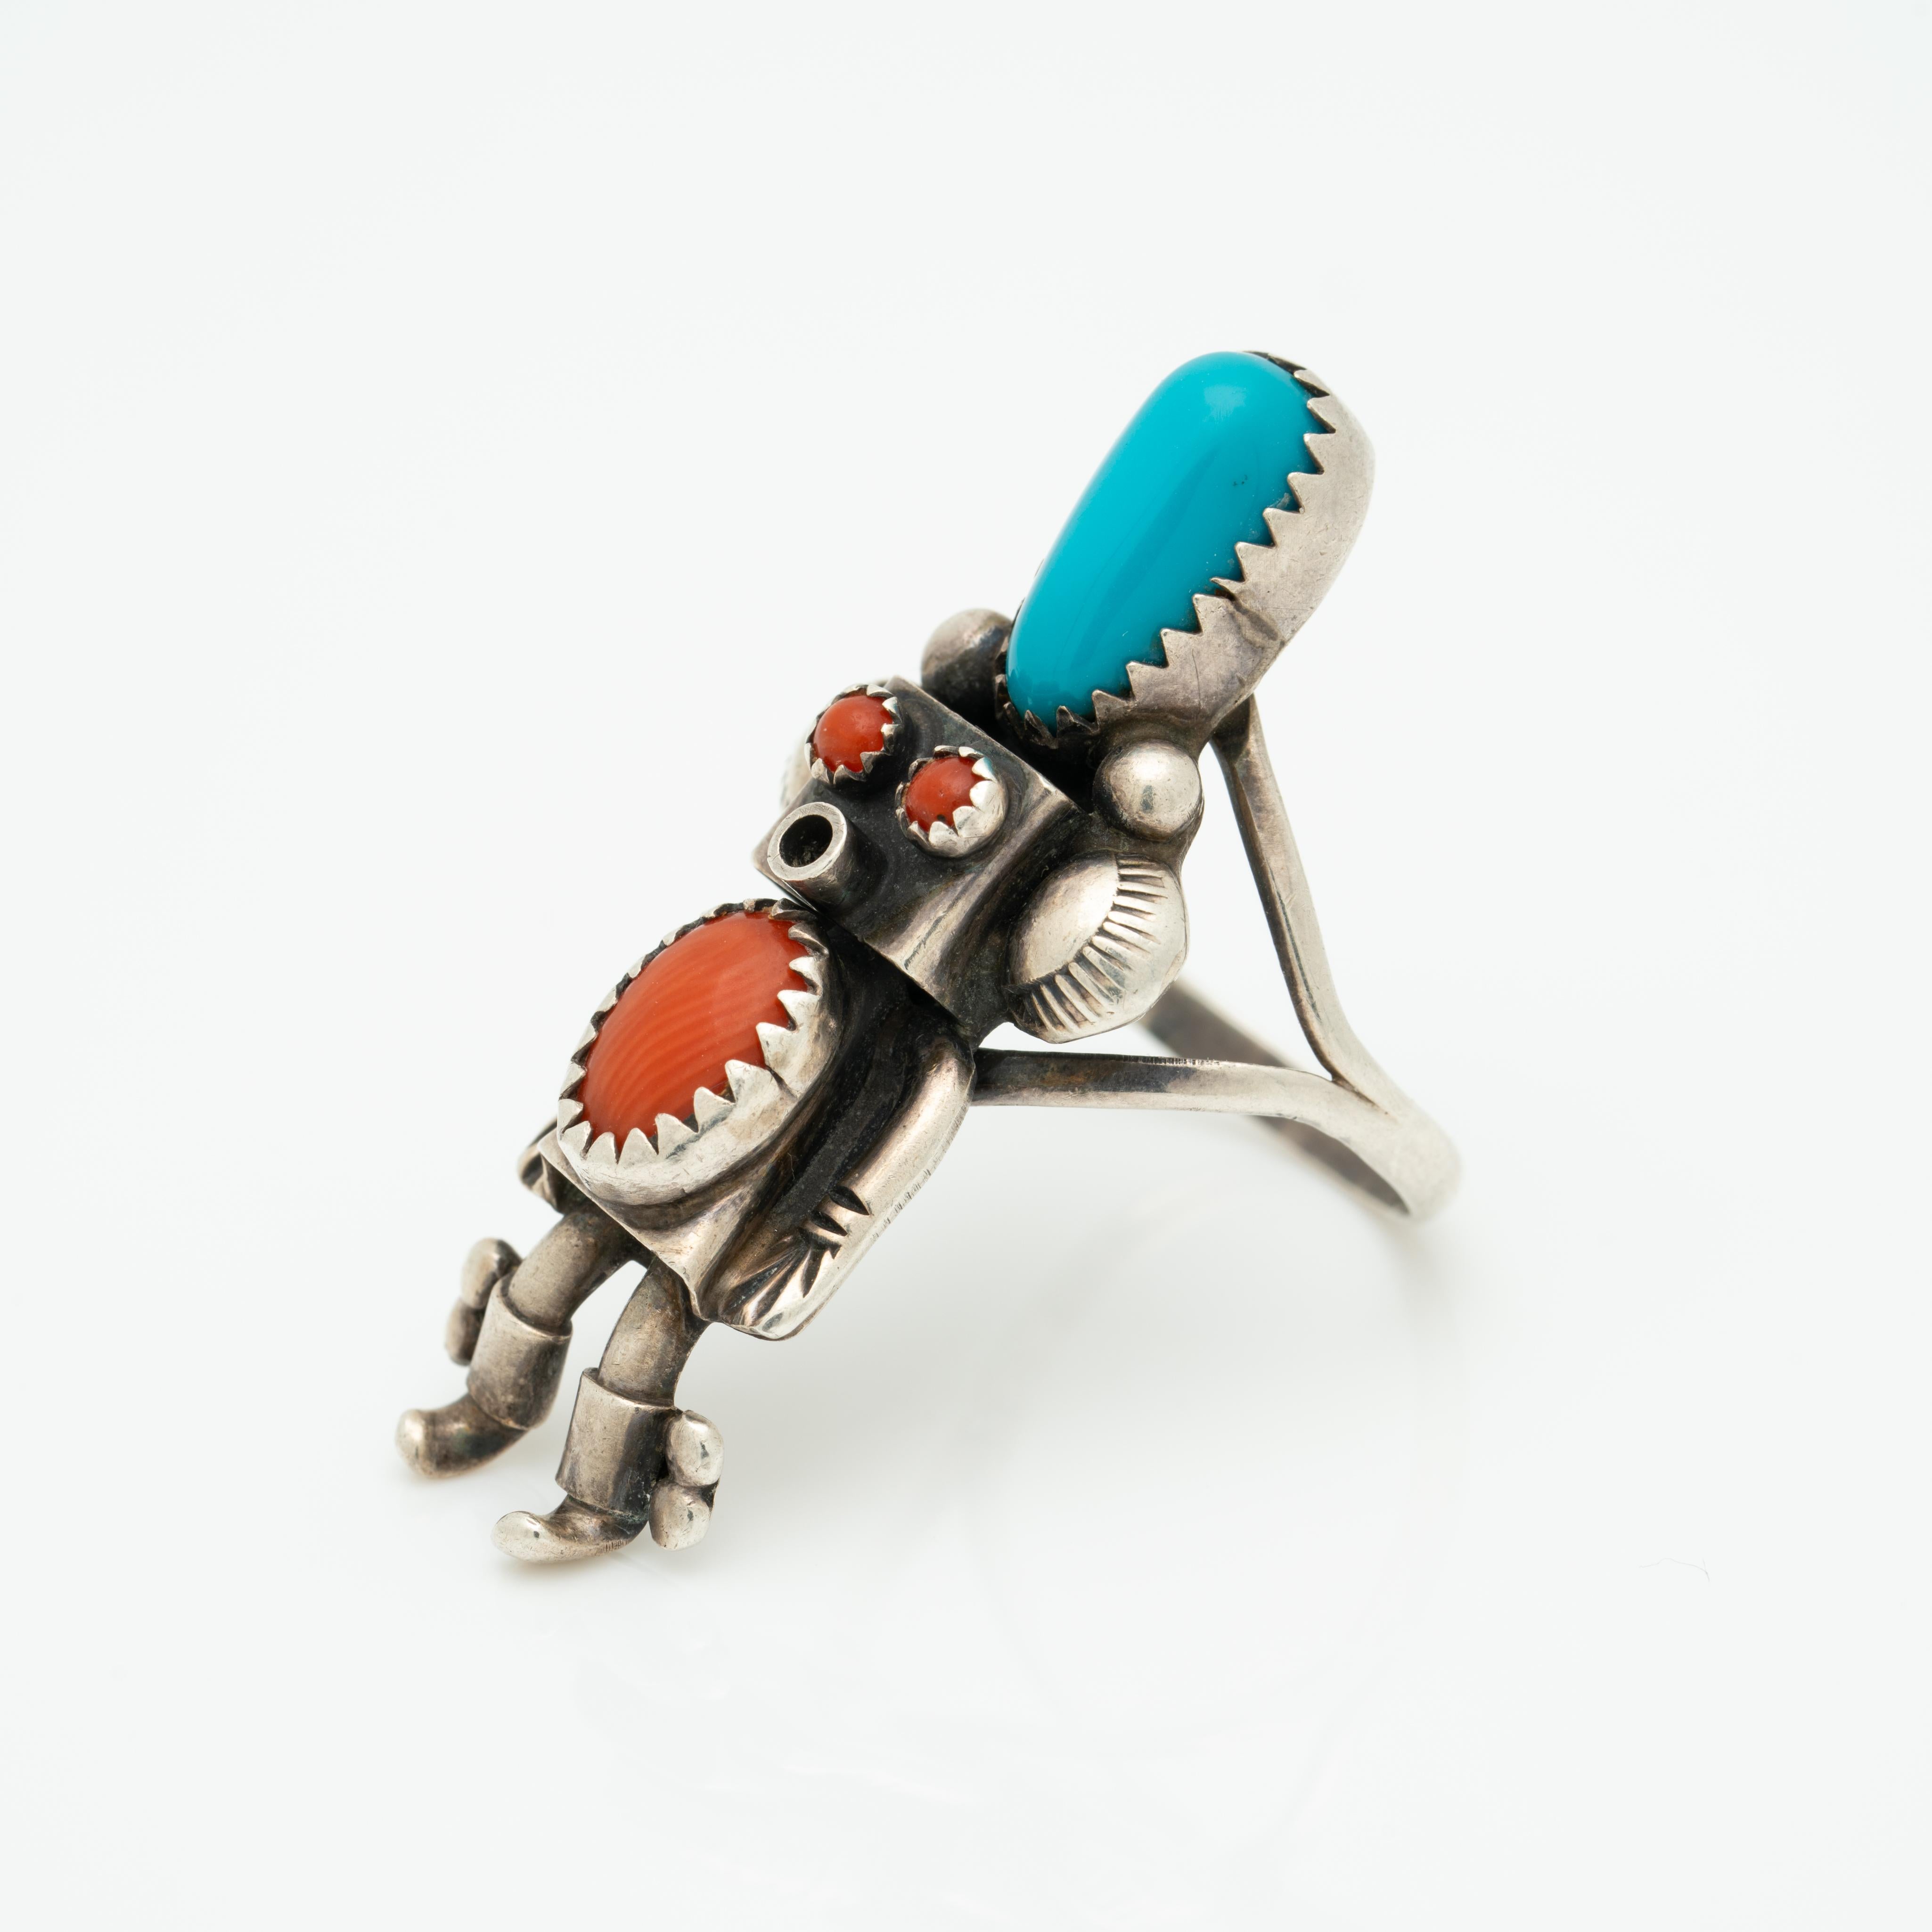 Vintage Native American Zuni Kachina Doll Ring featuring Coral and Turquoise 
(wards off evil)(good omen!) 
c.1970s / size 7

Height: 38.54mm
Width: 16.41mm
Weight: 5.92 grams 